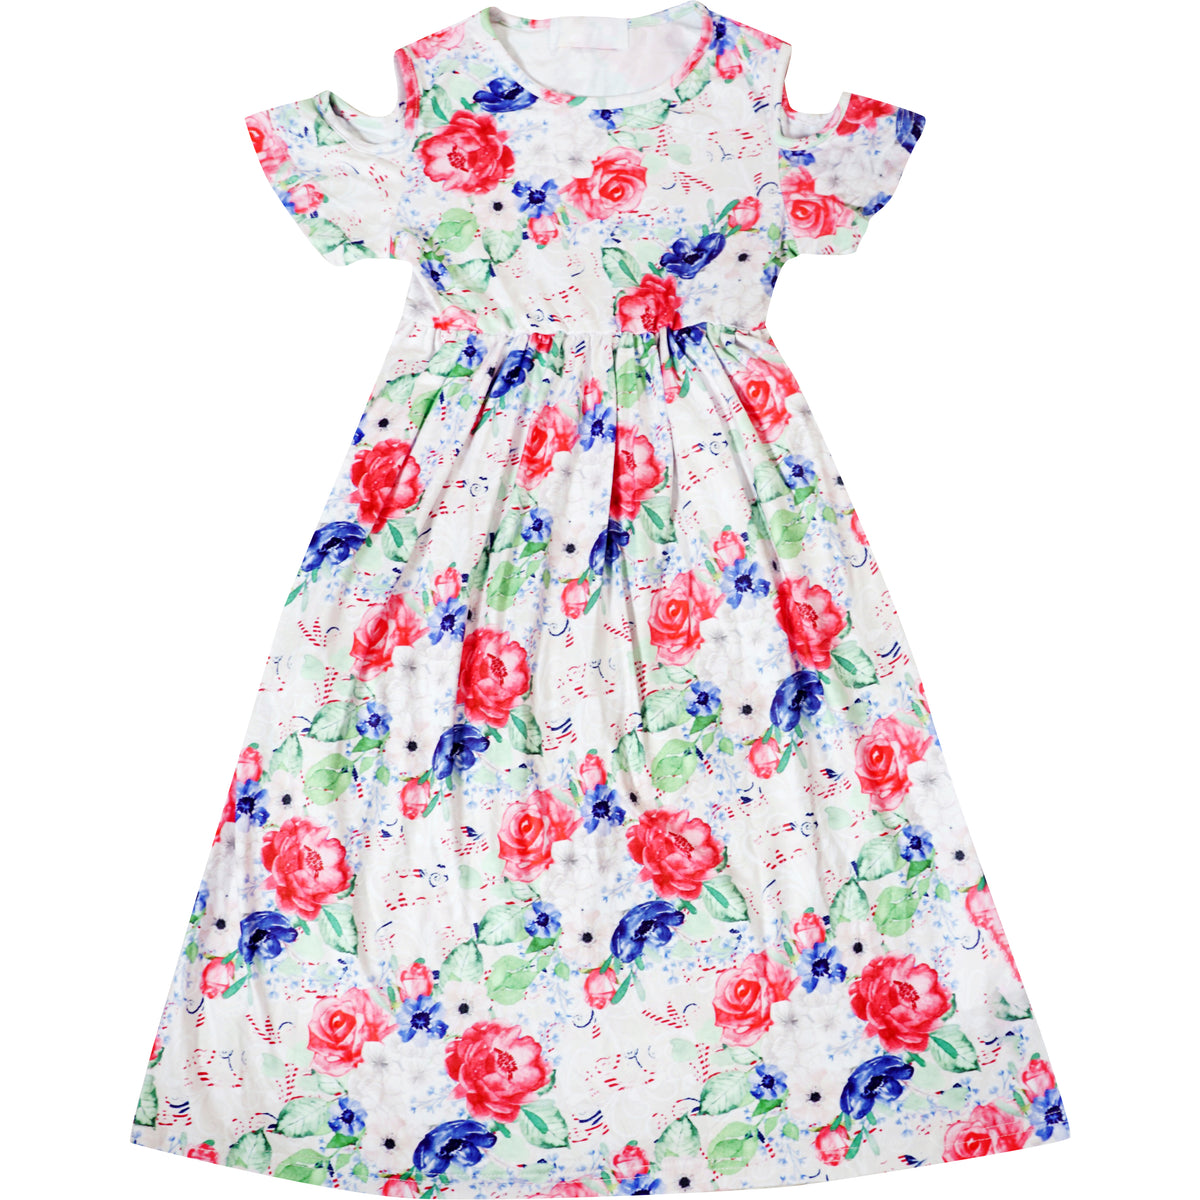 Girls 4th of July Independence Day Cold Shoulder Floral Maxi Dress Red White Blue - Angeline Kids